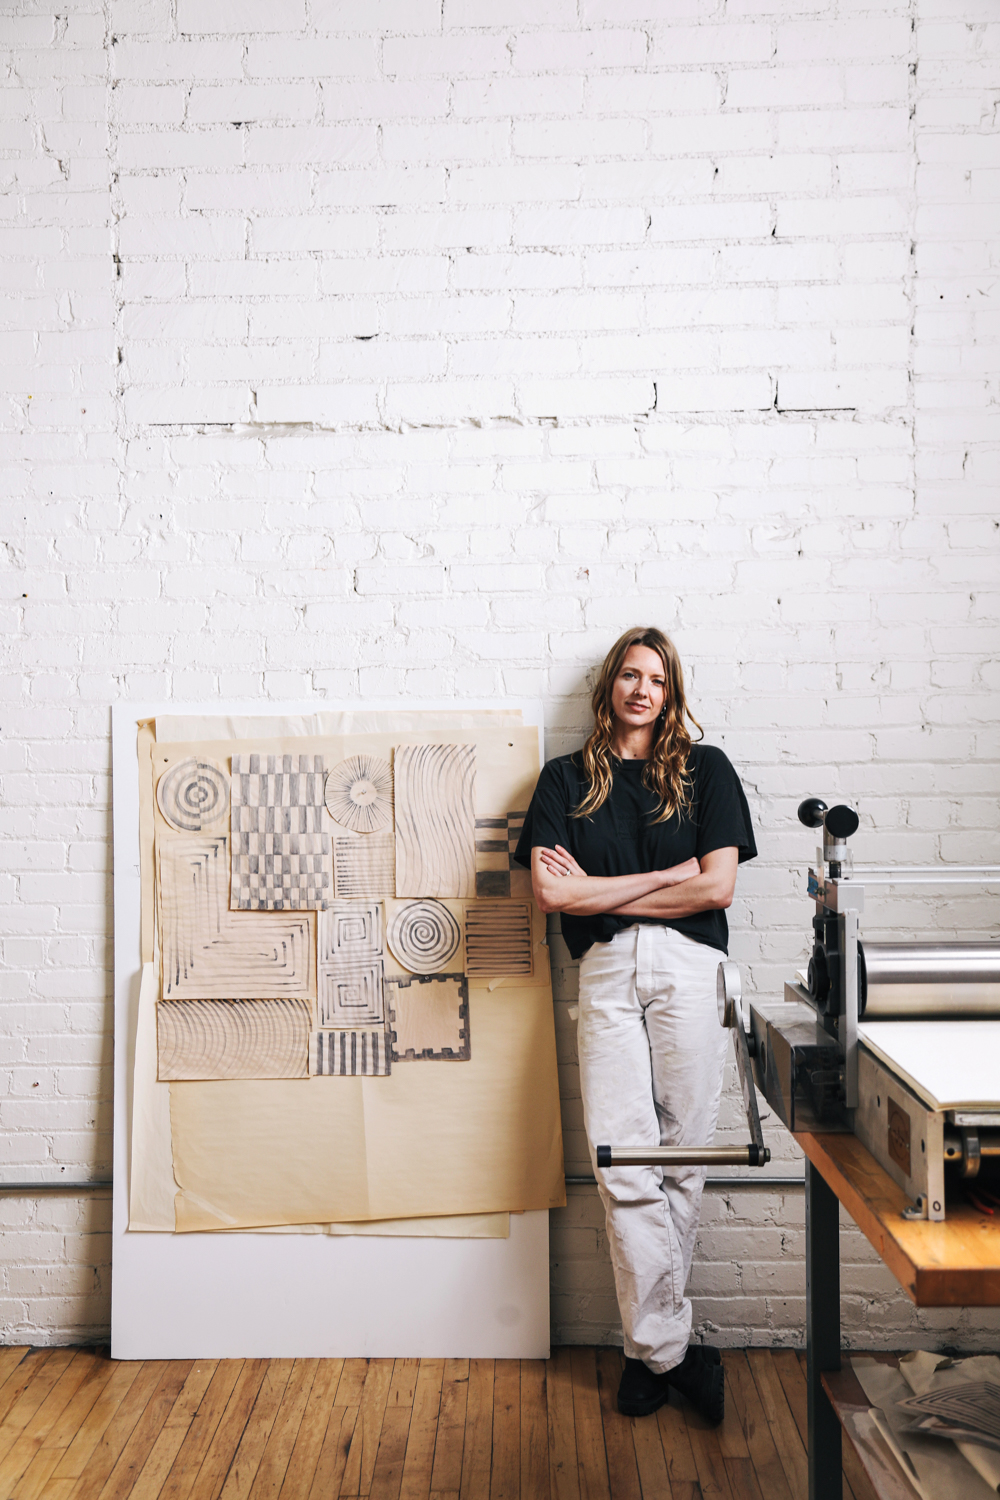 Cheryl Humphreys stands in front of a paper press and hand drawn sample works against a white brick wall